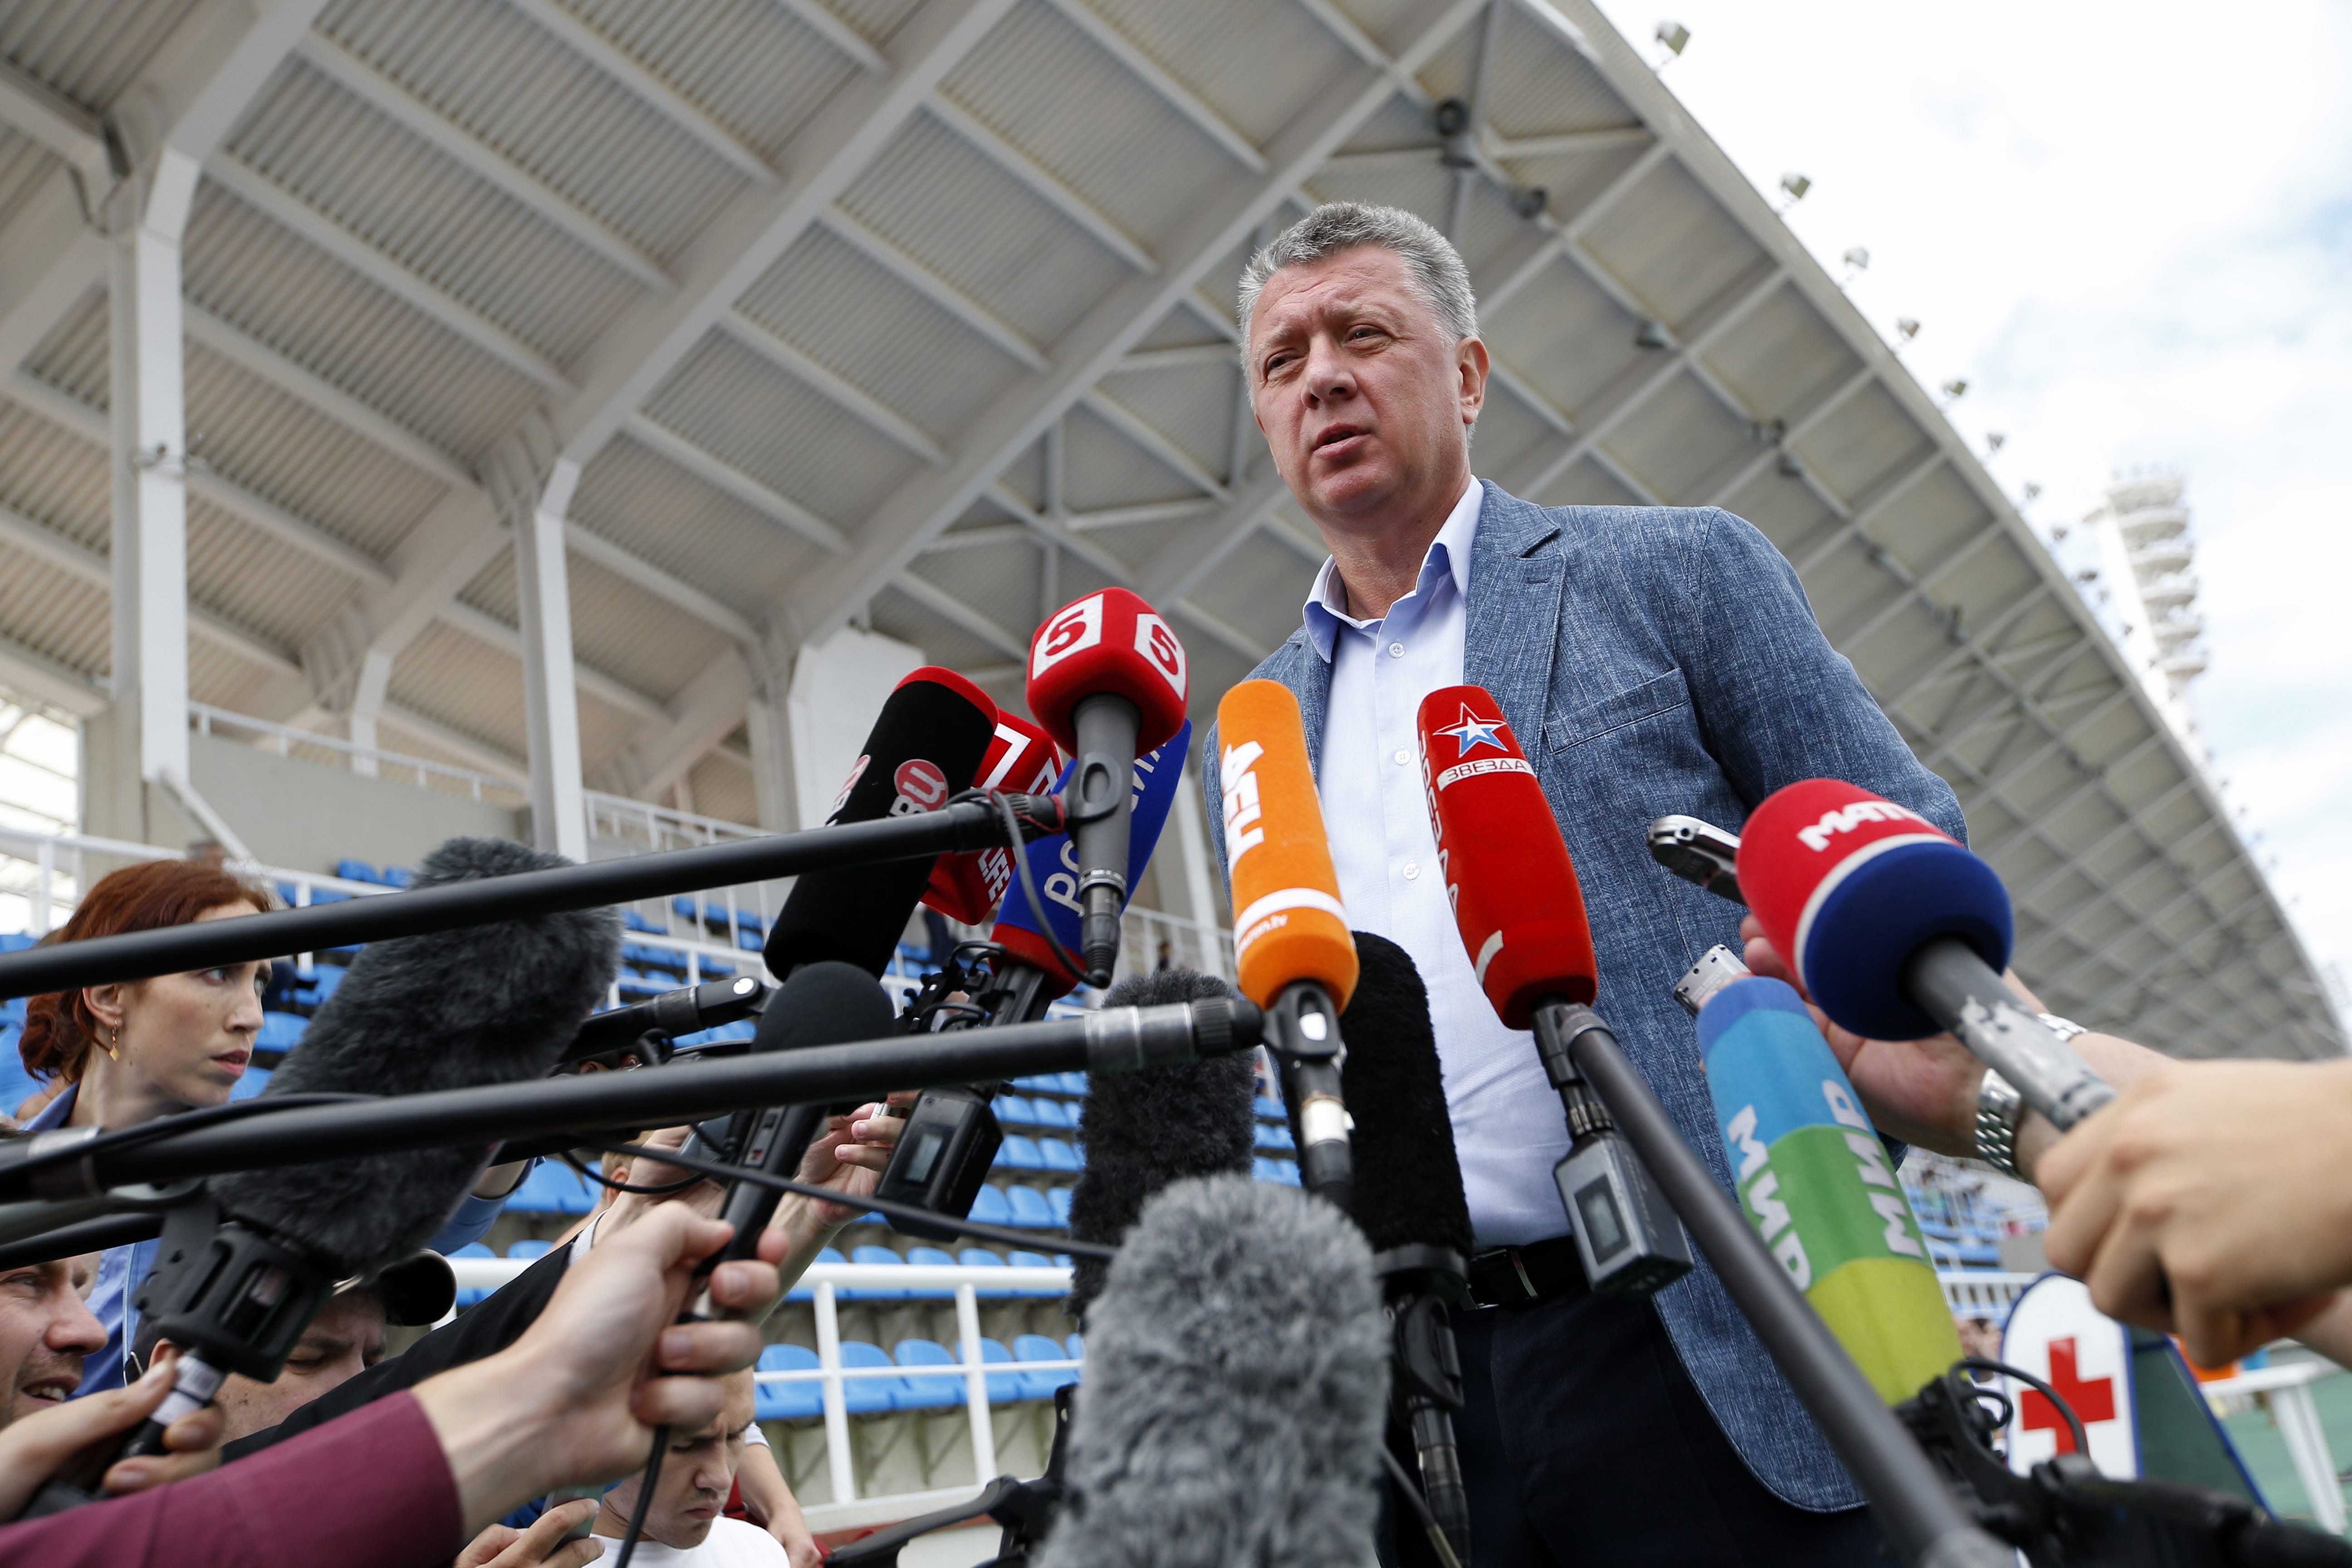 Dmitry Shlyakhtin, head of the Russian track and field federation, speaks to journalists prior to the Russian Athletics Cup, at Zhukovsky, outside Moscow, Russia, Thursday, July 21, 2016. Russia lost its appeal Thursday against the Olympic ban on its track and field athletes, a decision which could add pressure on the IOC to exclude the country entirely from next month's games in Rio de Janeiro.